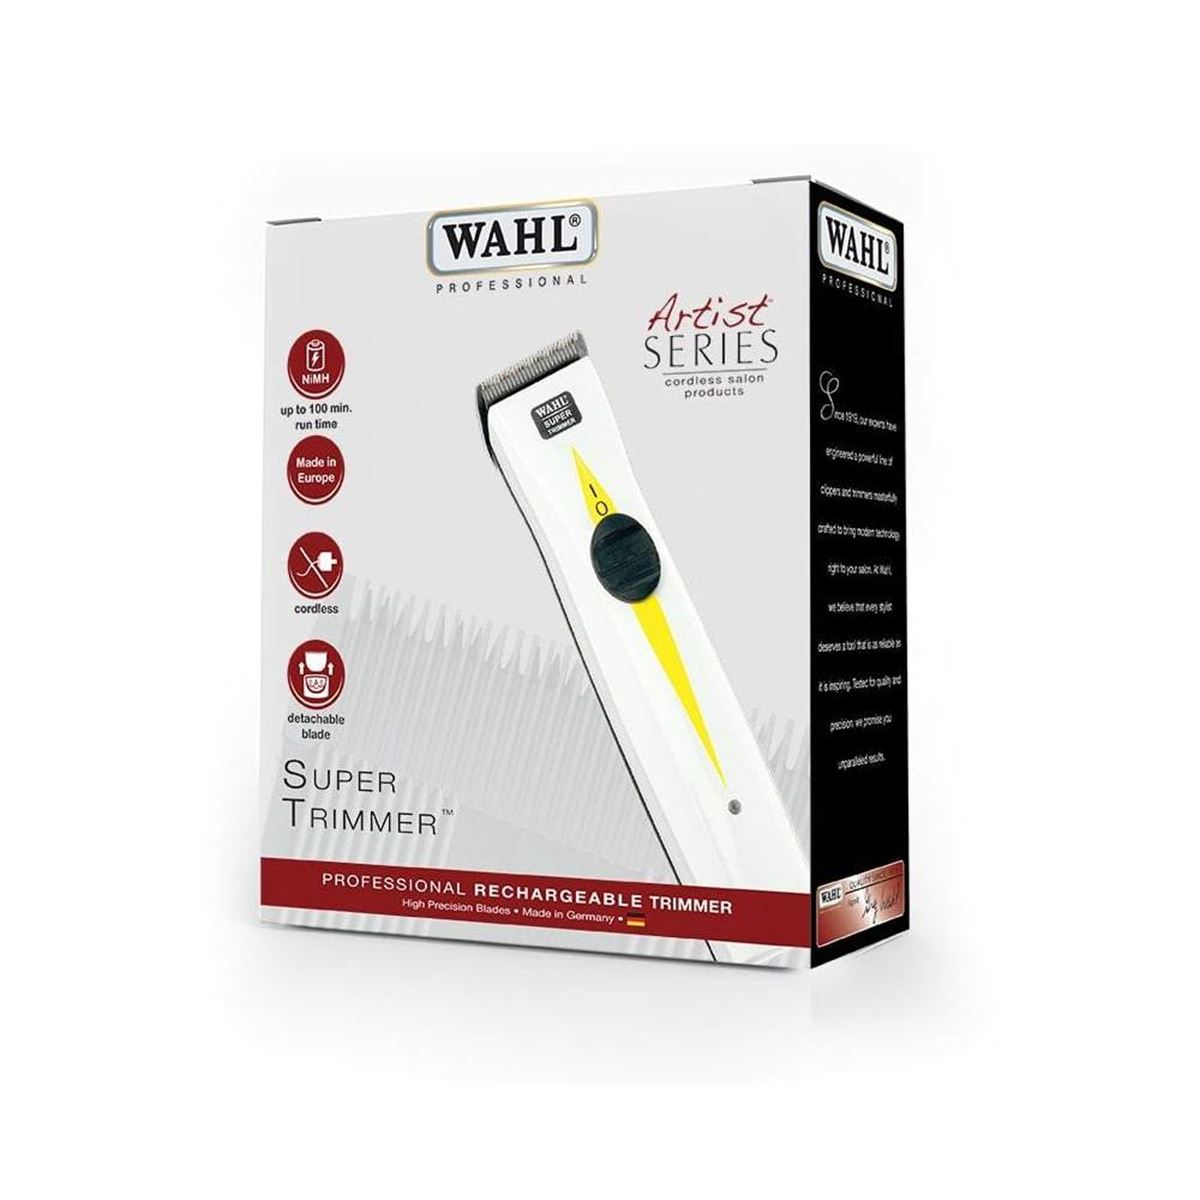 WAHL Professional Rechargeable Super Trimmer